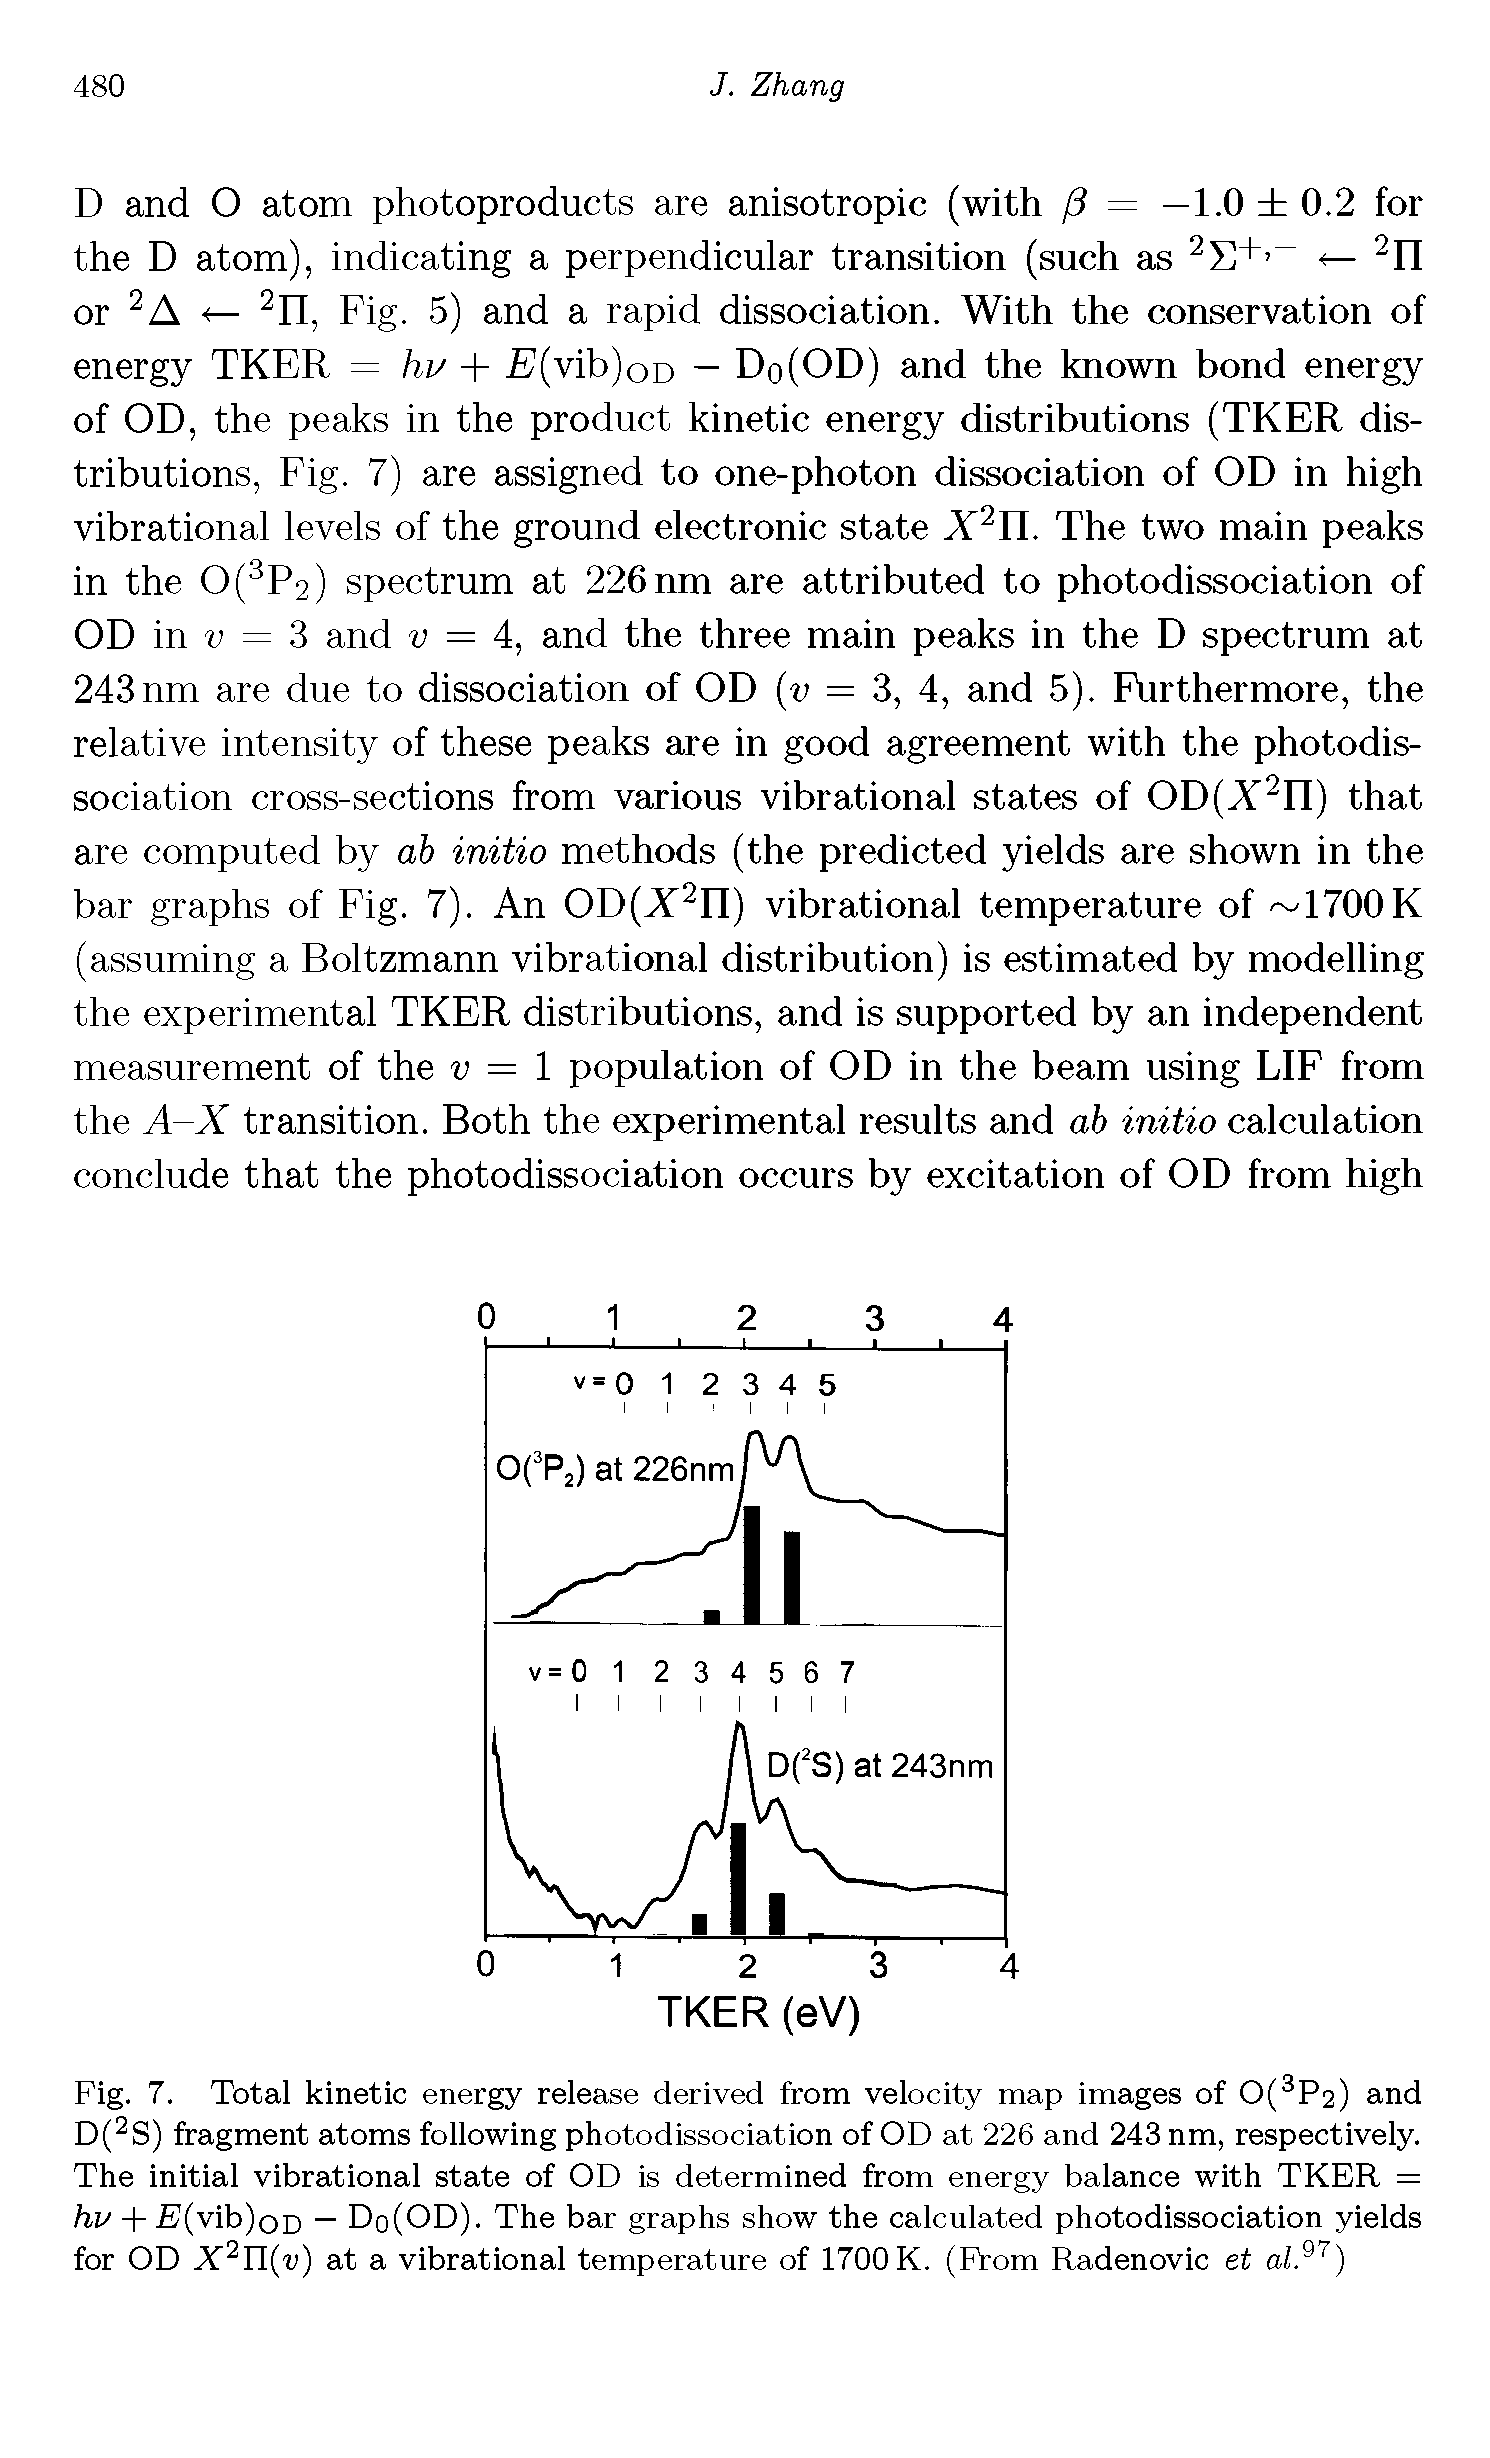 Fig. 7. Total kinetic energy release derived from velocity map images of 0(3P2) and D(2S) fragment atoms following photodissociation of OD at 226 and 243 nm, respectively. The initial vibrational state of OD is determined from energy balance with TKER = hv + E(vib)oD — Do(OD). The bar graphs show the calculated photodissociation yields for OD X2Il(v) at a vibrational temperature of 1700 K. (From Radenovic et al.97)...